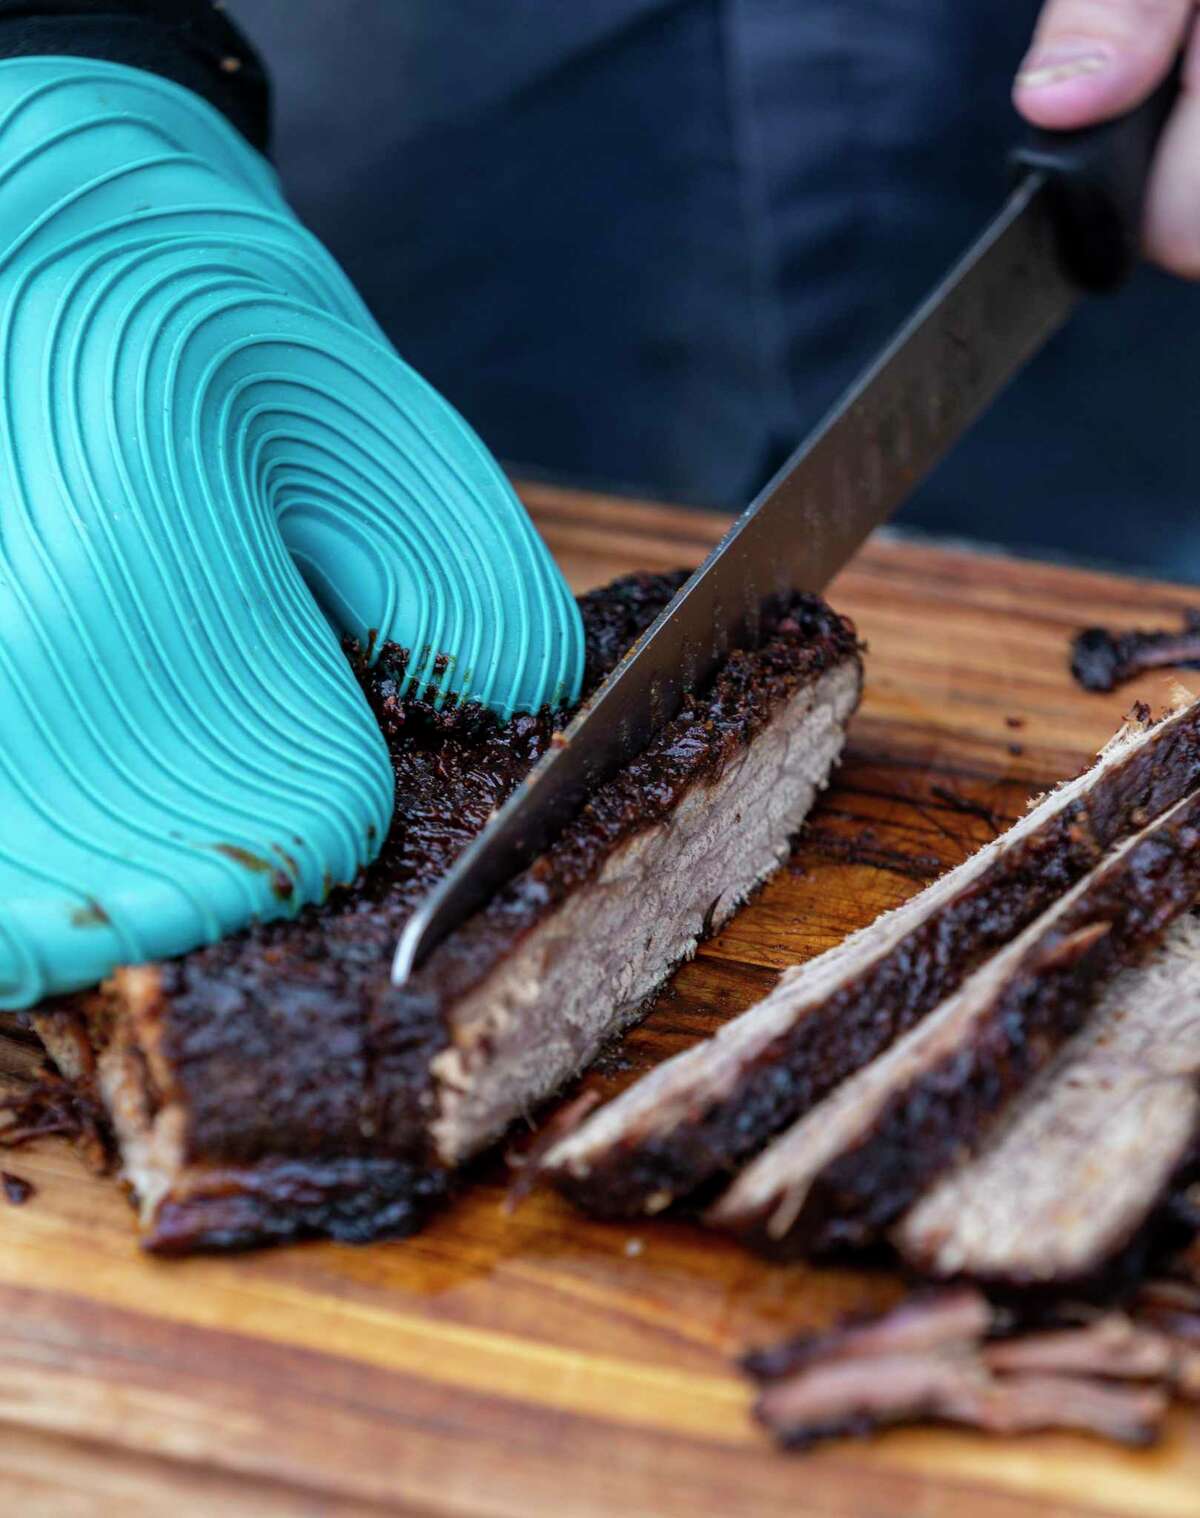 Brisket cooked in the oven gets sliced at Chuck’s Food Shack.